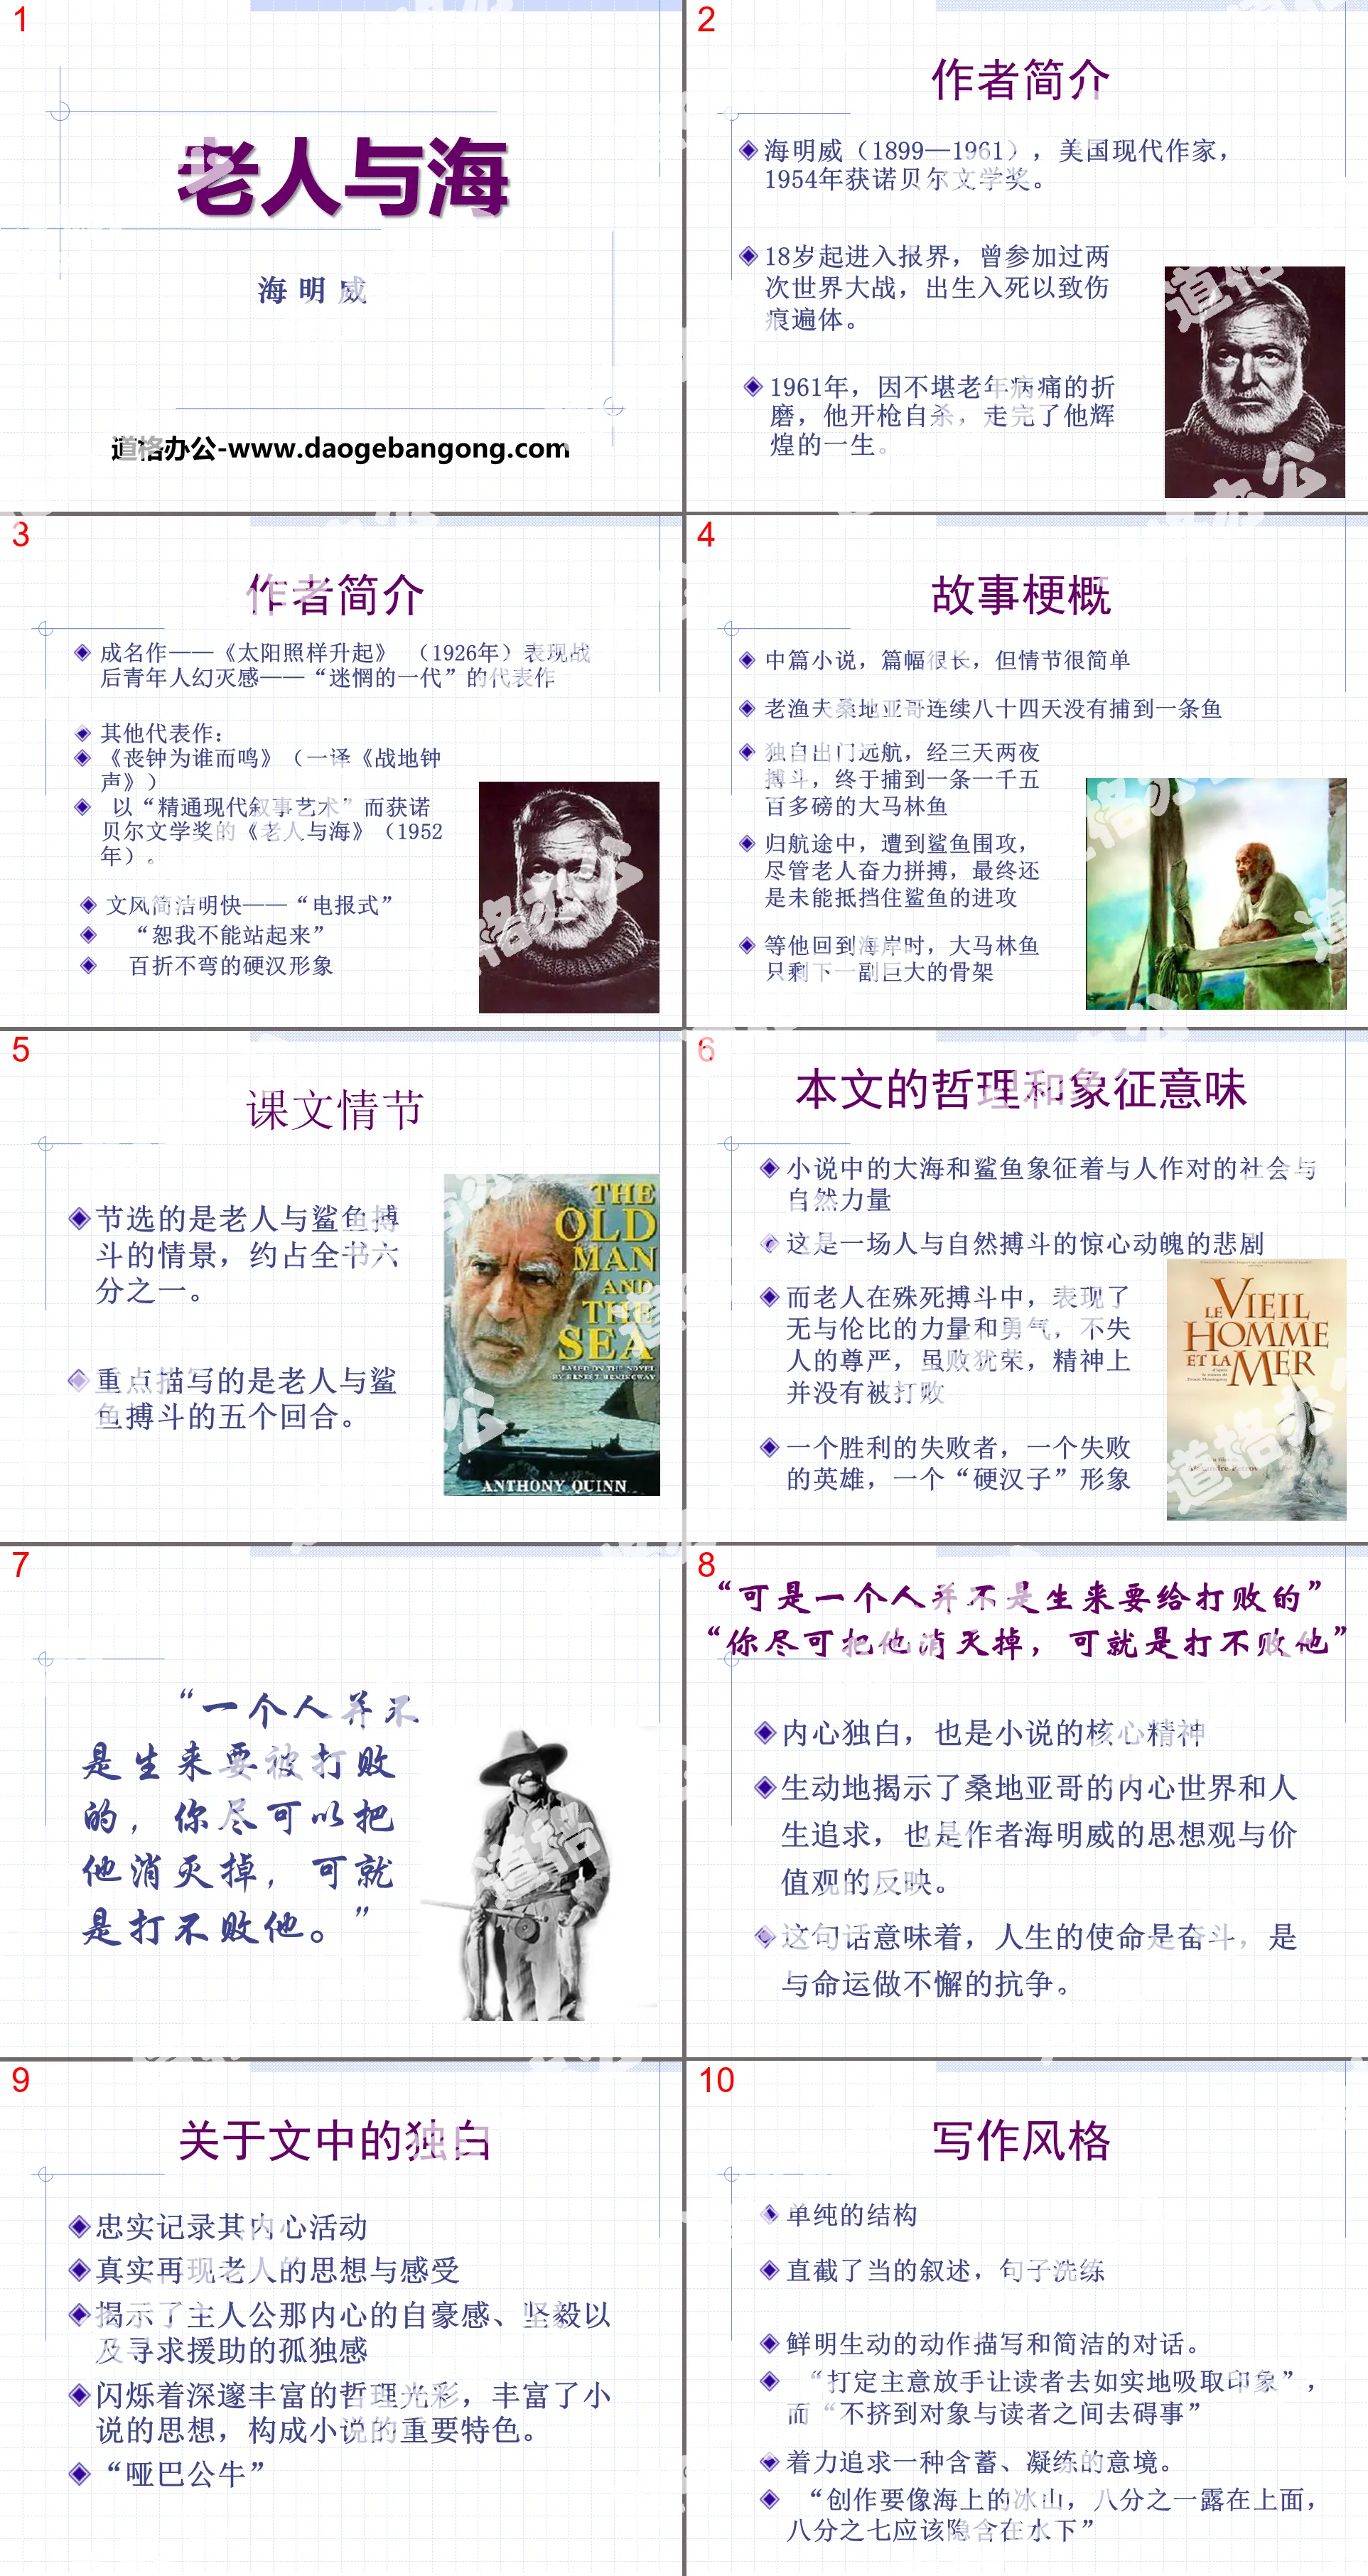 "The Old Man and the Sea" PPT download